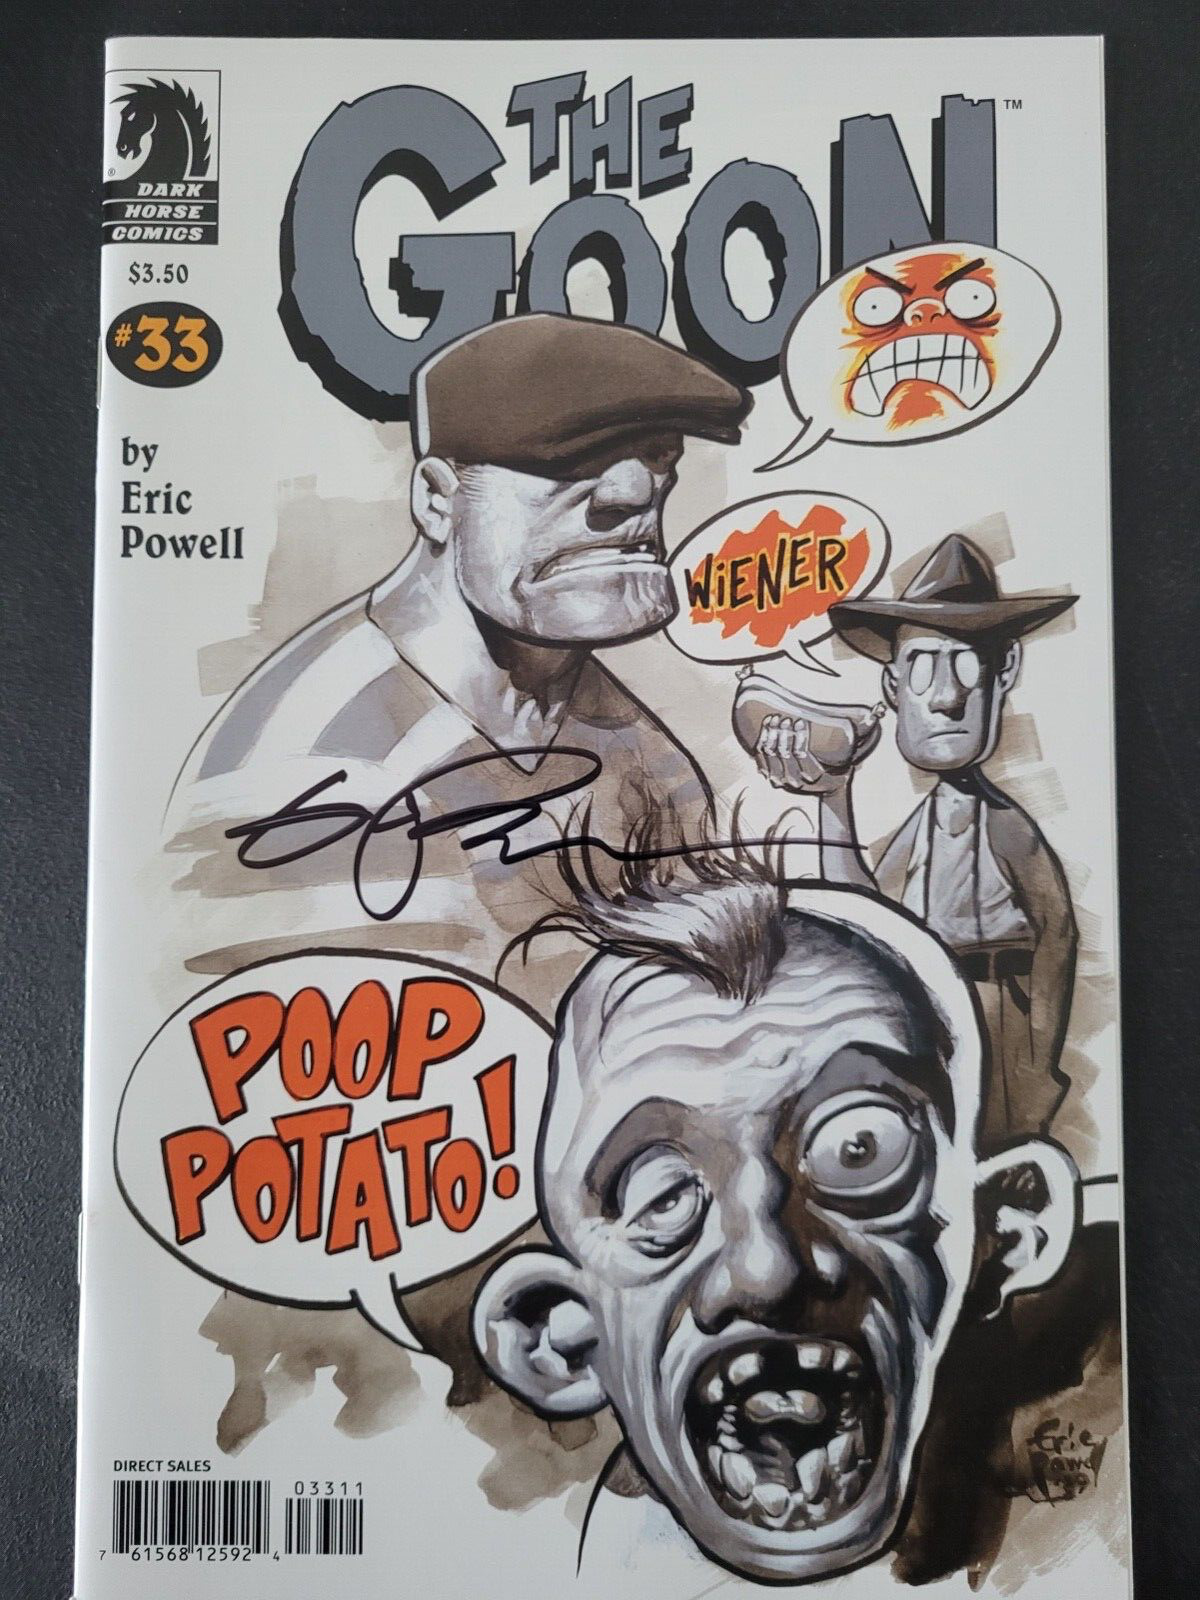 THE GOON #33 (2009) DARK HORSE COMICS AUTOGRAPHED/SIGNED By ERIC POWELL